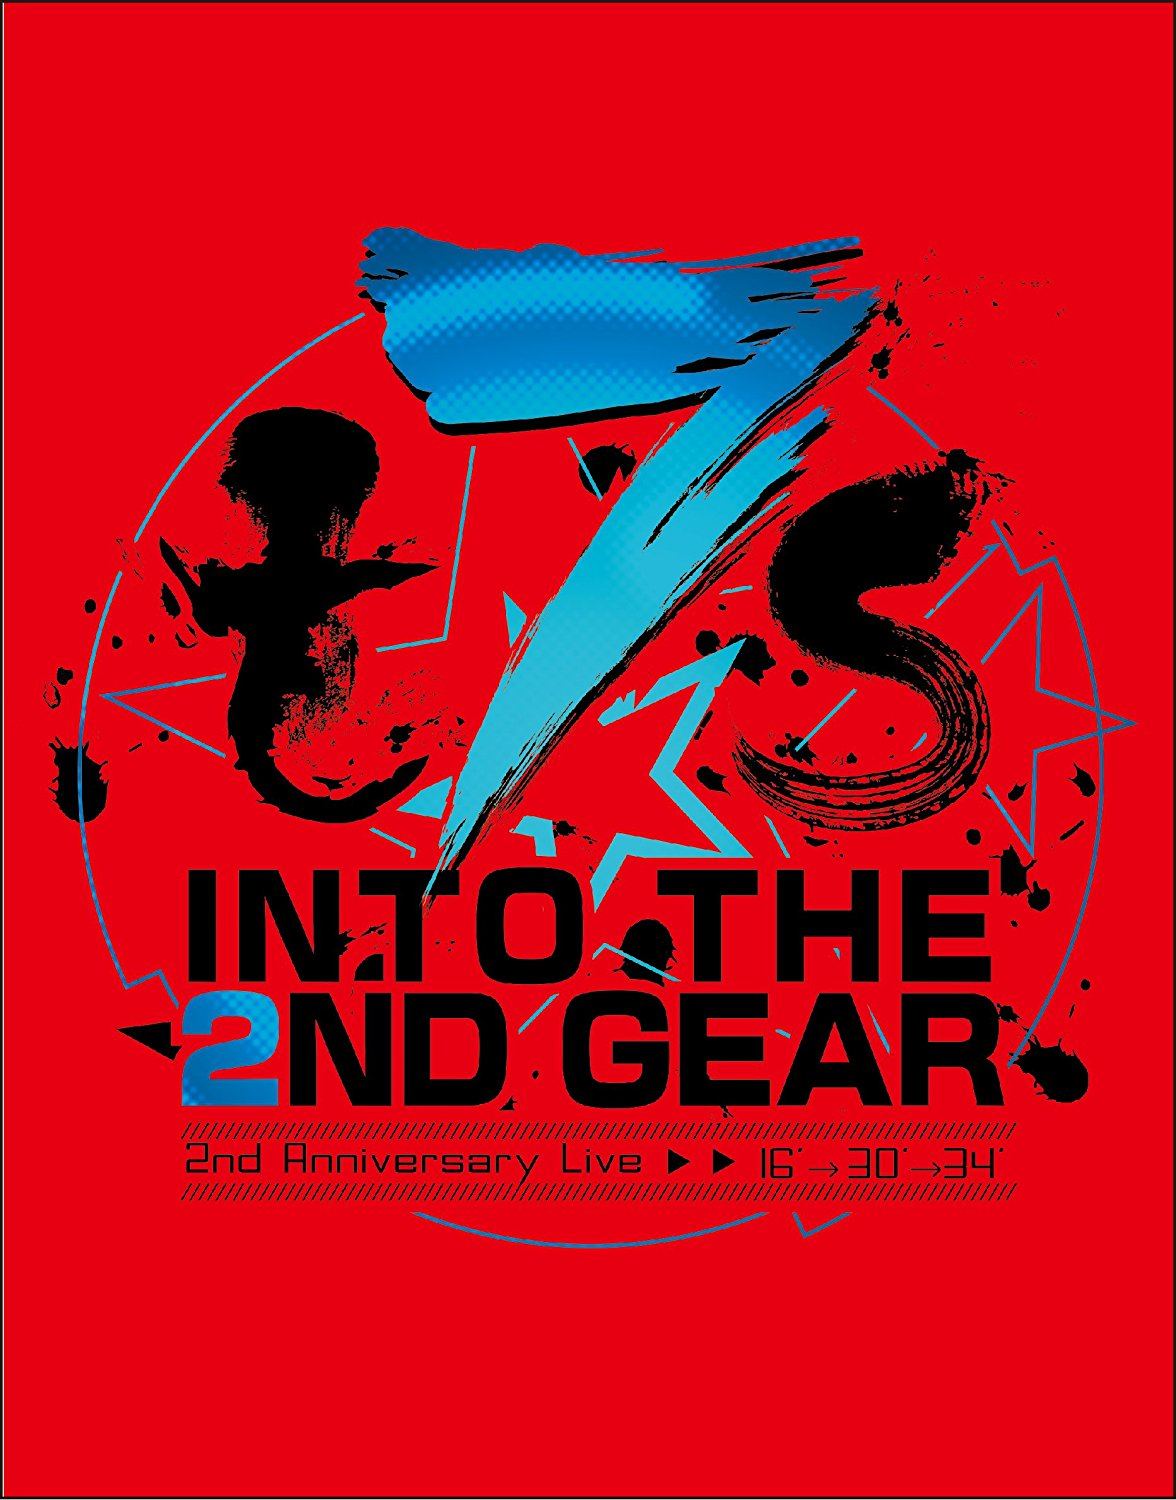 J Pop T7s 2nd Anniversary Live 16 30 34 Into The 2nd Gear Tokyo 7th Sisters